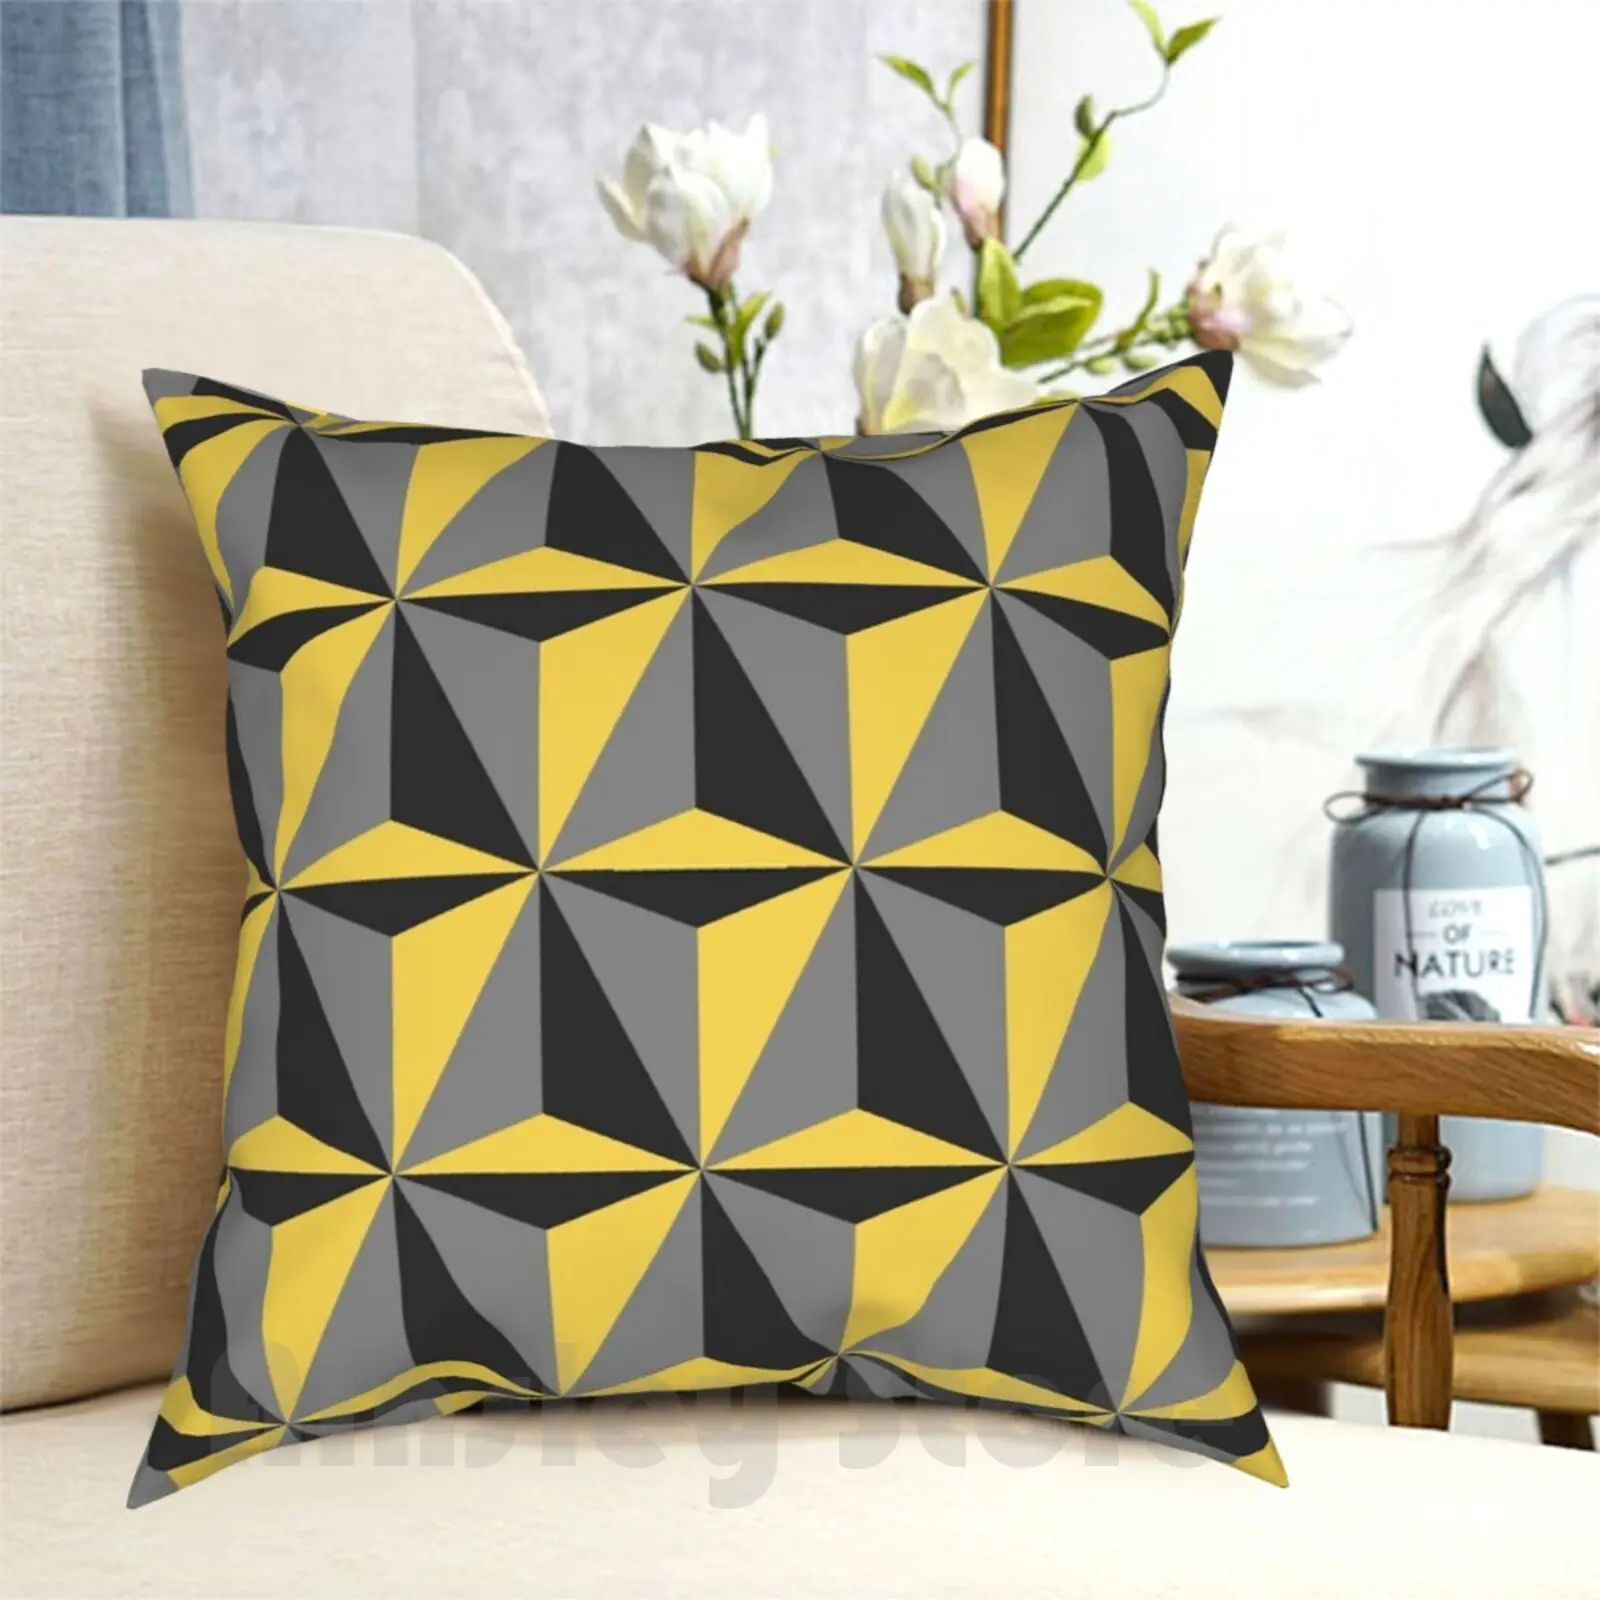 

Mustard Yellow And Gray Geometric Pillow Case Printed Home Soft Throw Pillow Minimalist Polygons Gray Pale Yellow